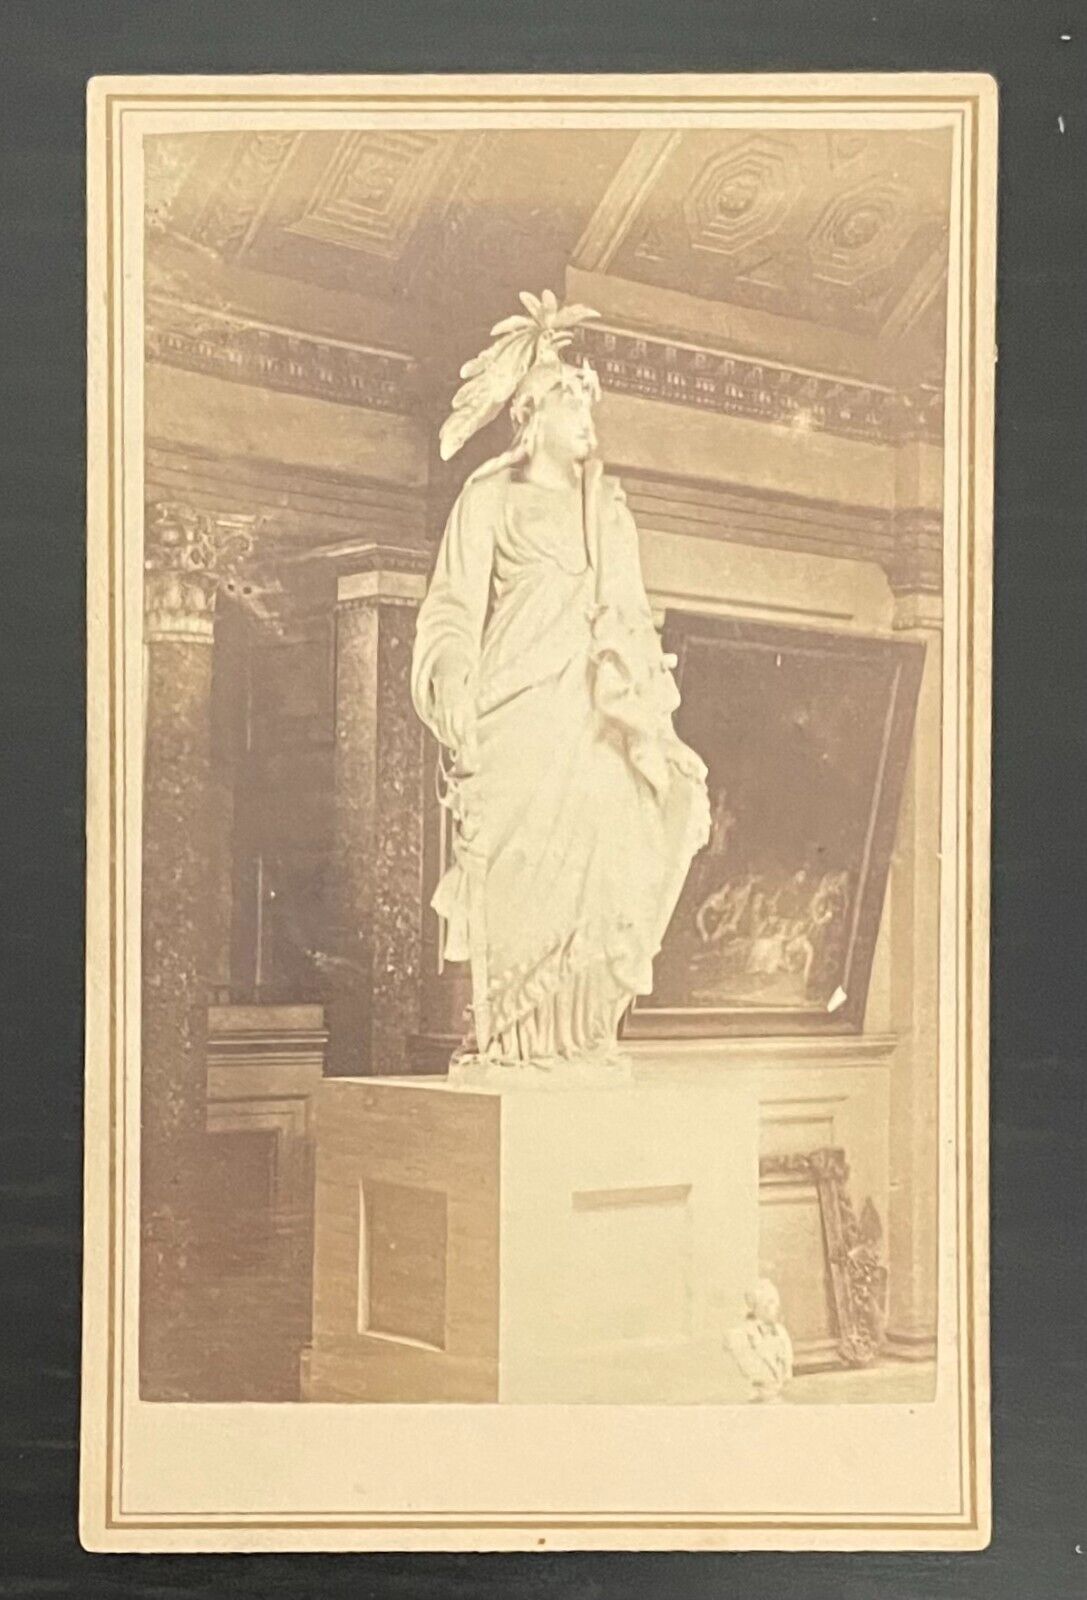 STATUE OF FREEDOM U.S. CAPITAL WASHINGTON D.C. 1862 CDV PHOTO by BELL & BROTHER